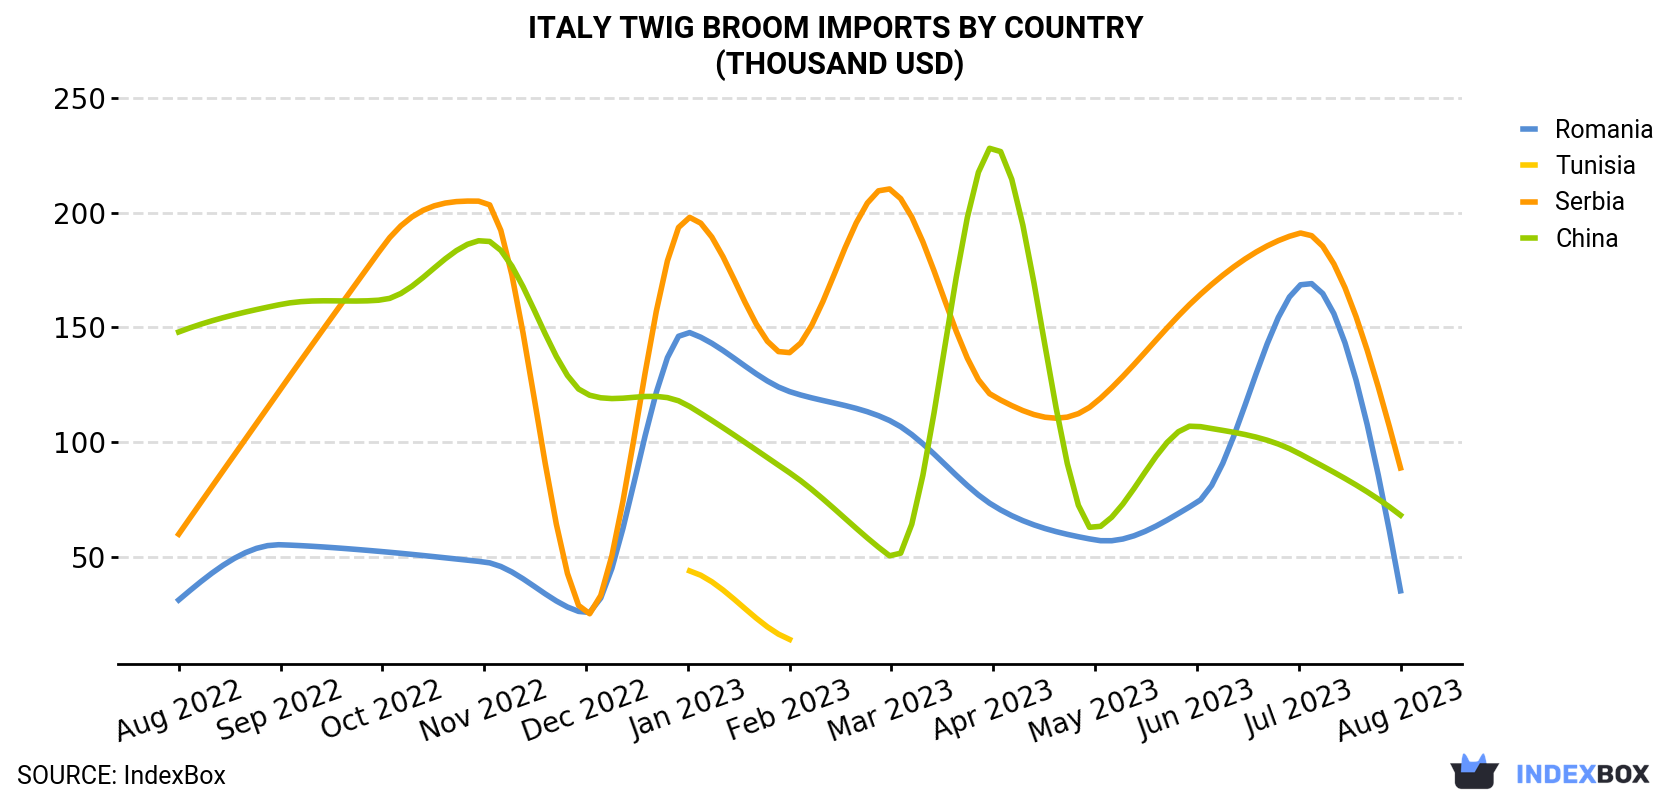 Italy Twig Broom Imports By Country (Thousand USD)